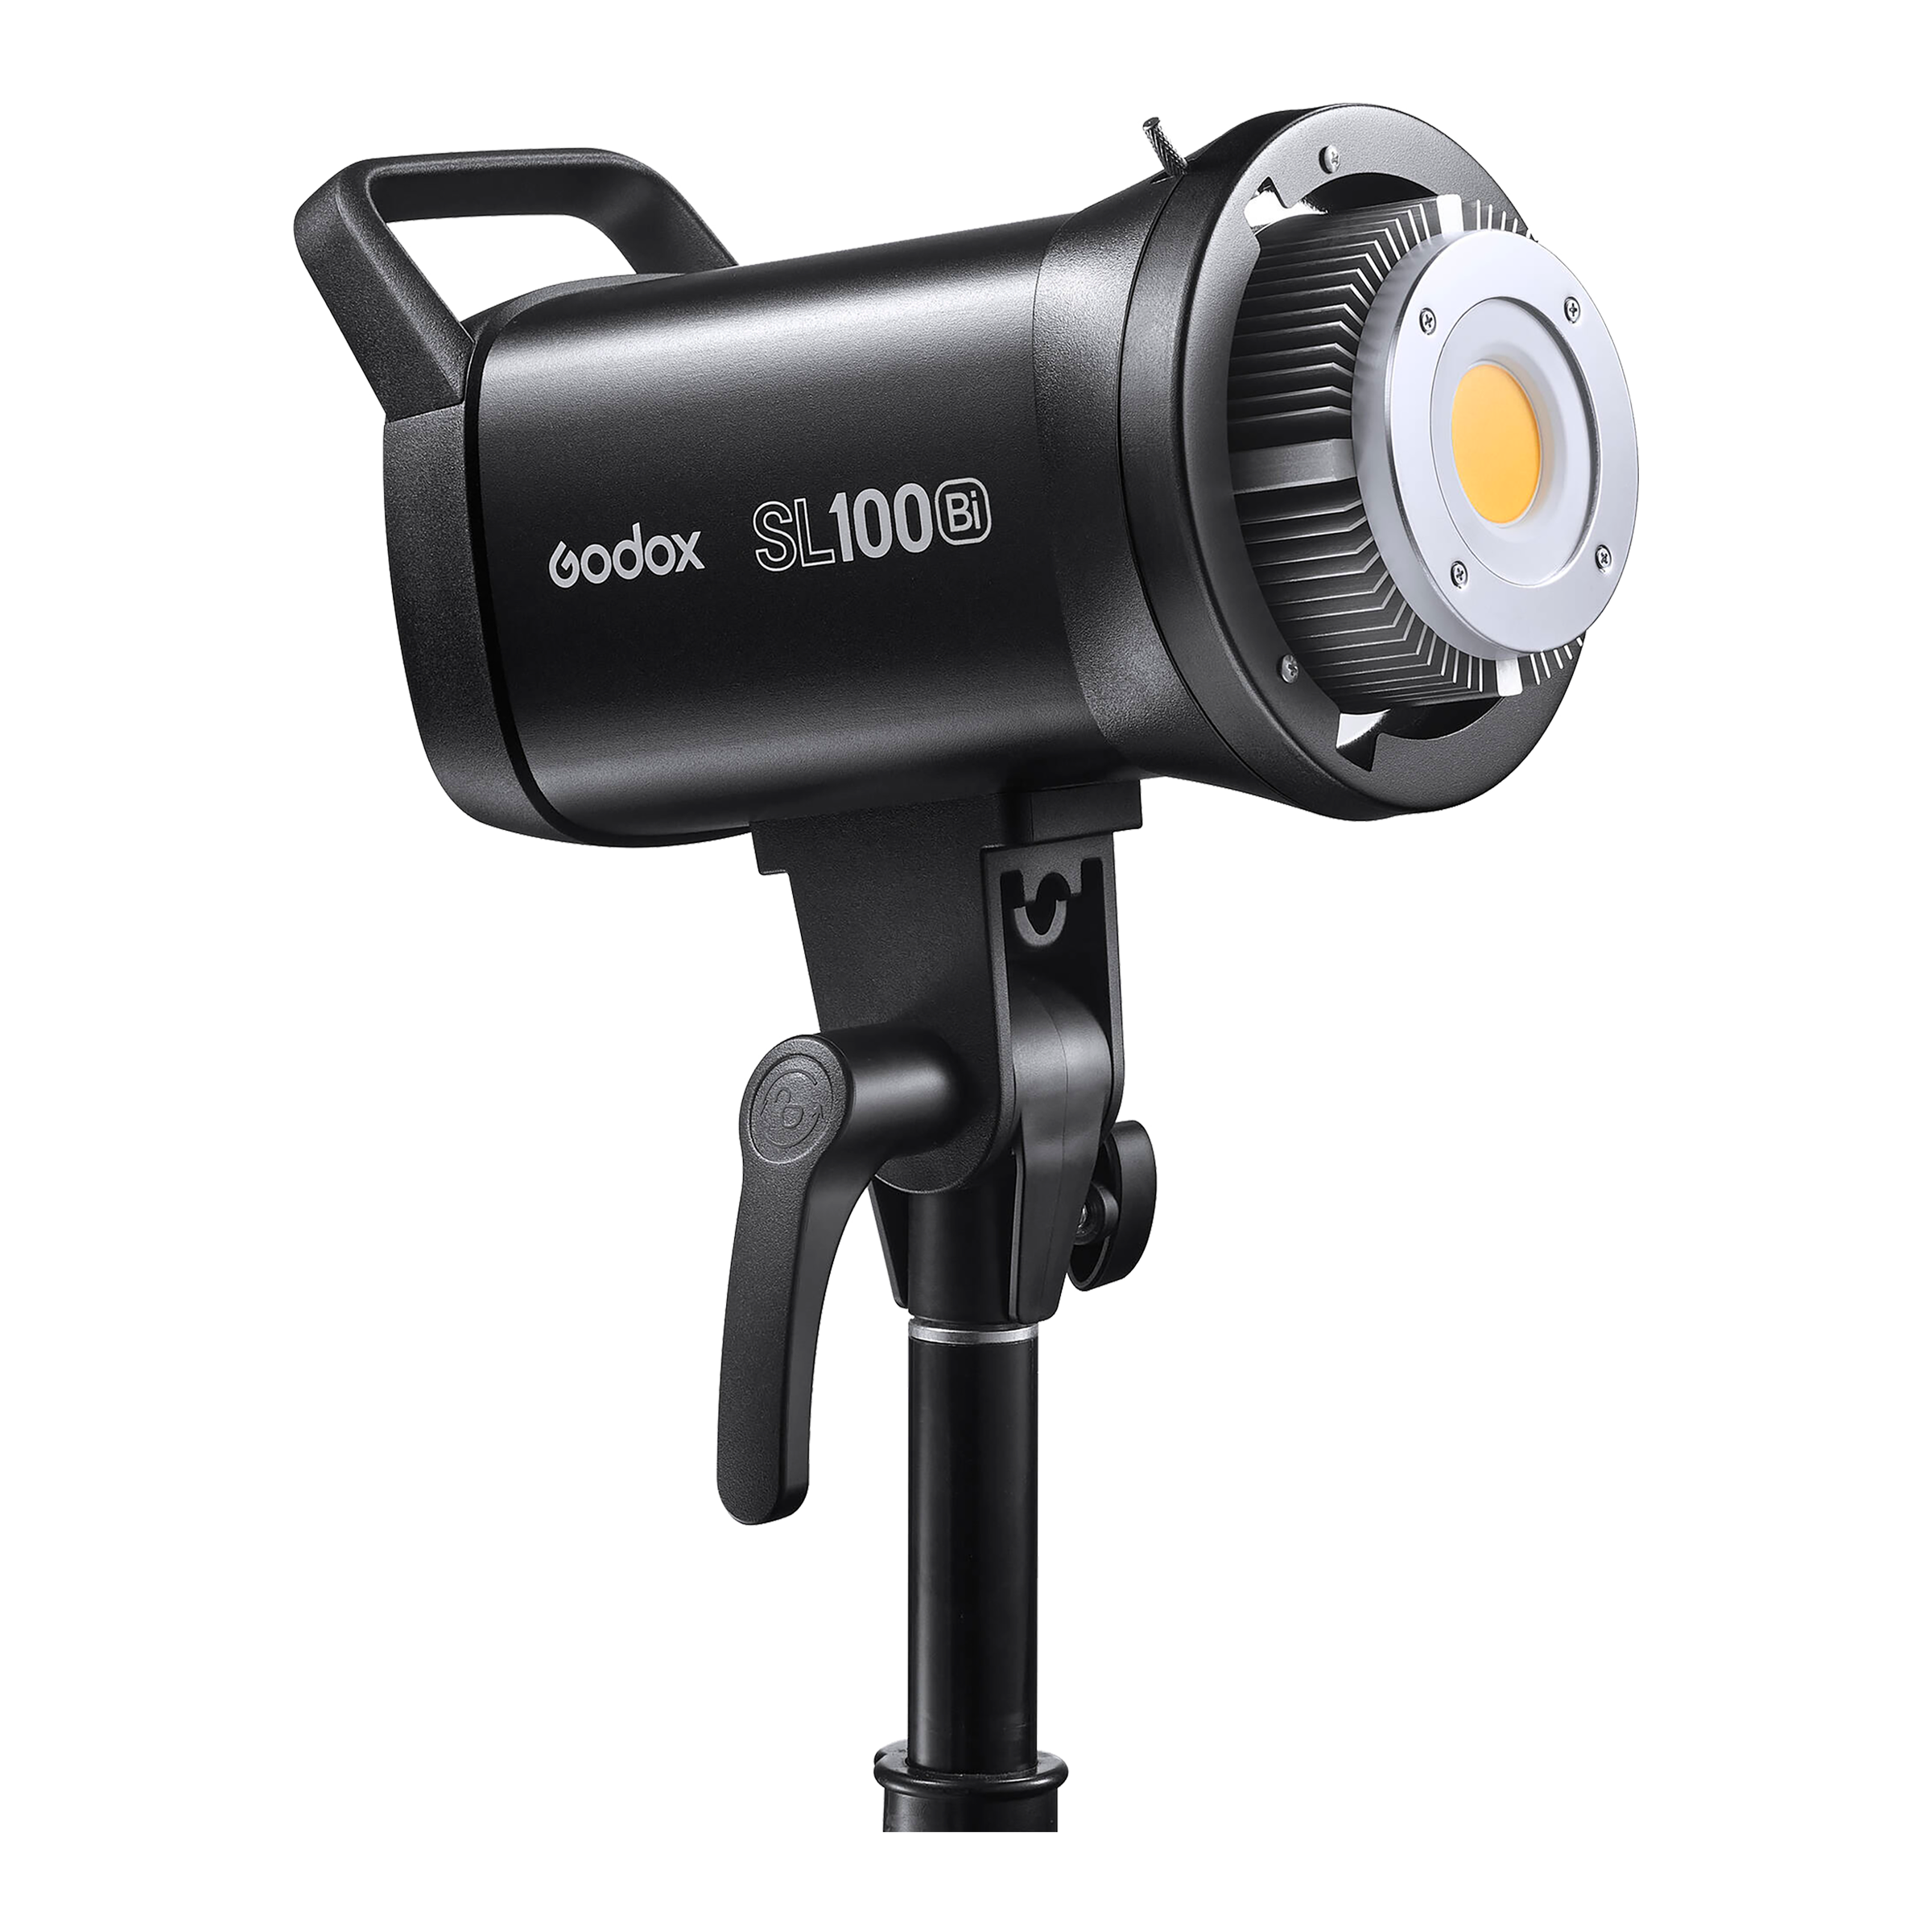 Godox SL100Bi LED Video Light with Bluetooth Connectivity for Photography & Videography (11 Lighting Effects)